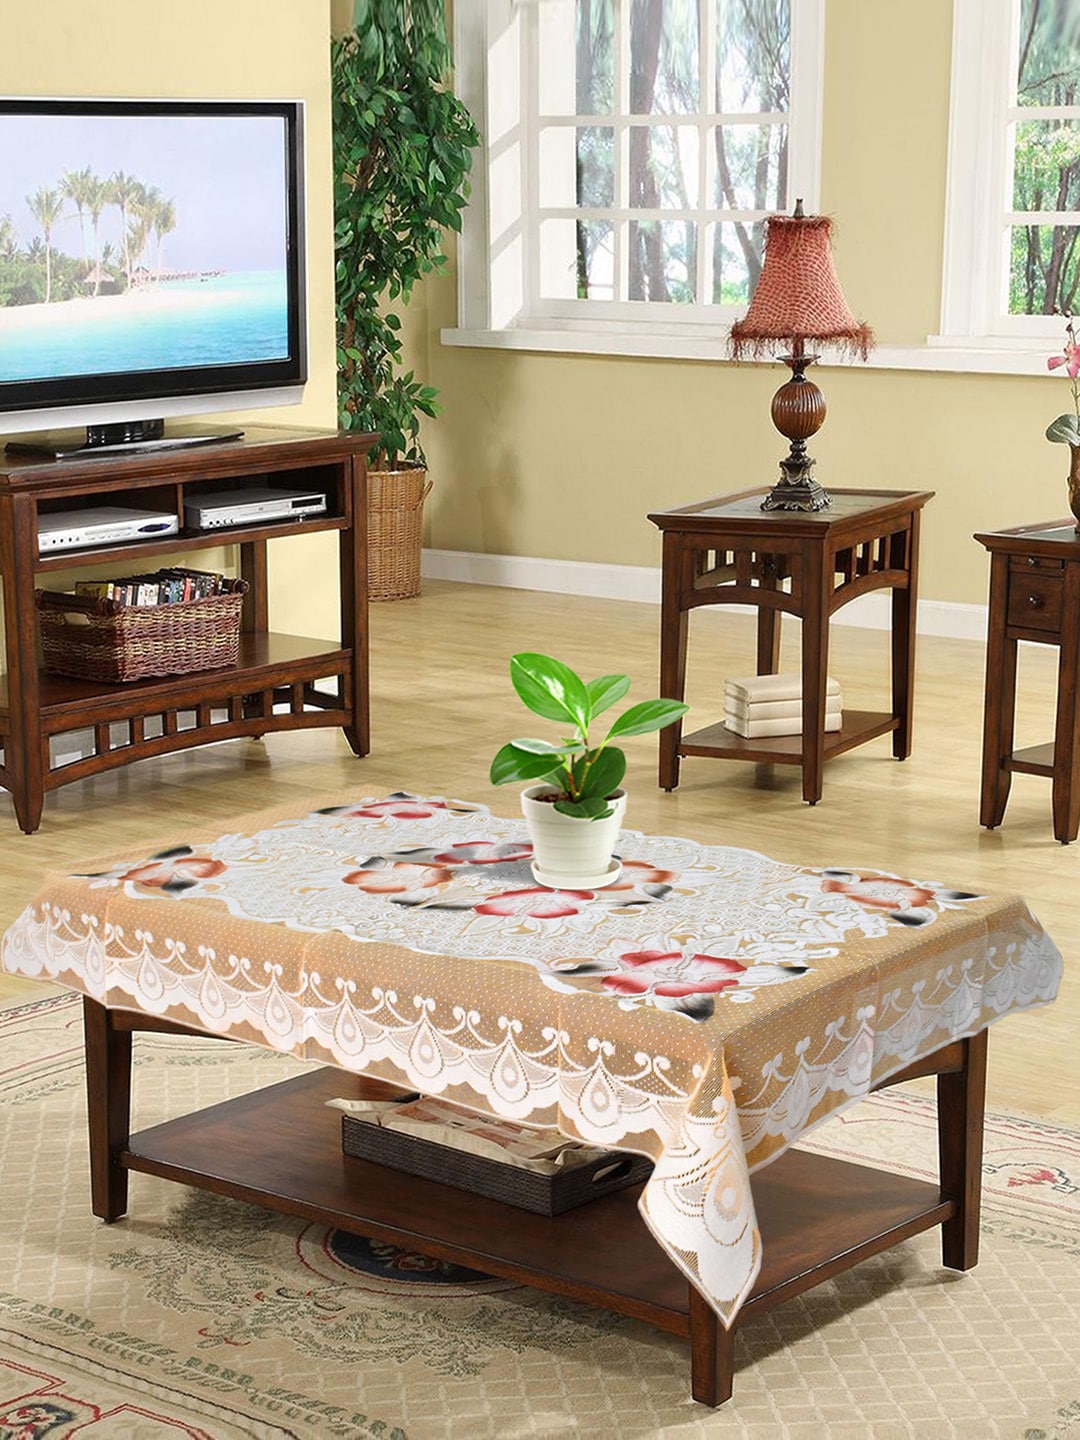 Kuber Industries Cream & White Printed 4-Seater Rectangular Cotton Table Cover Price in India